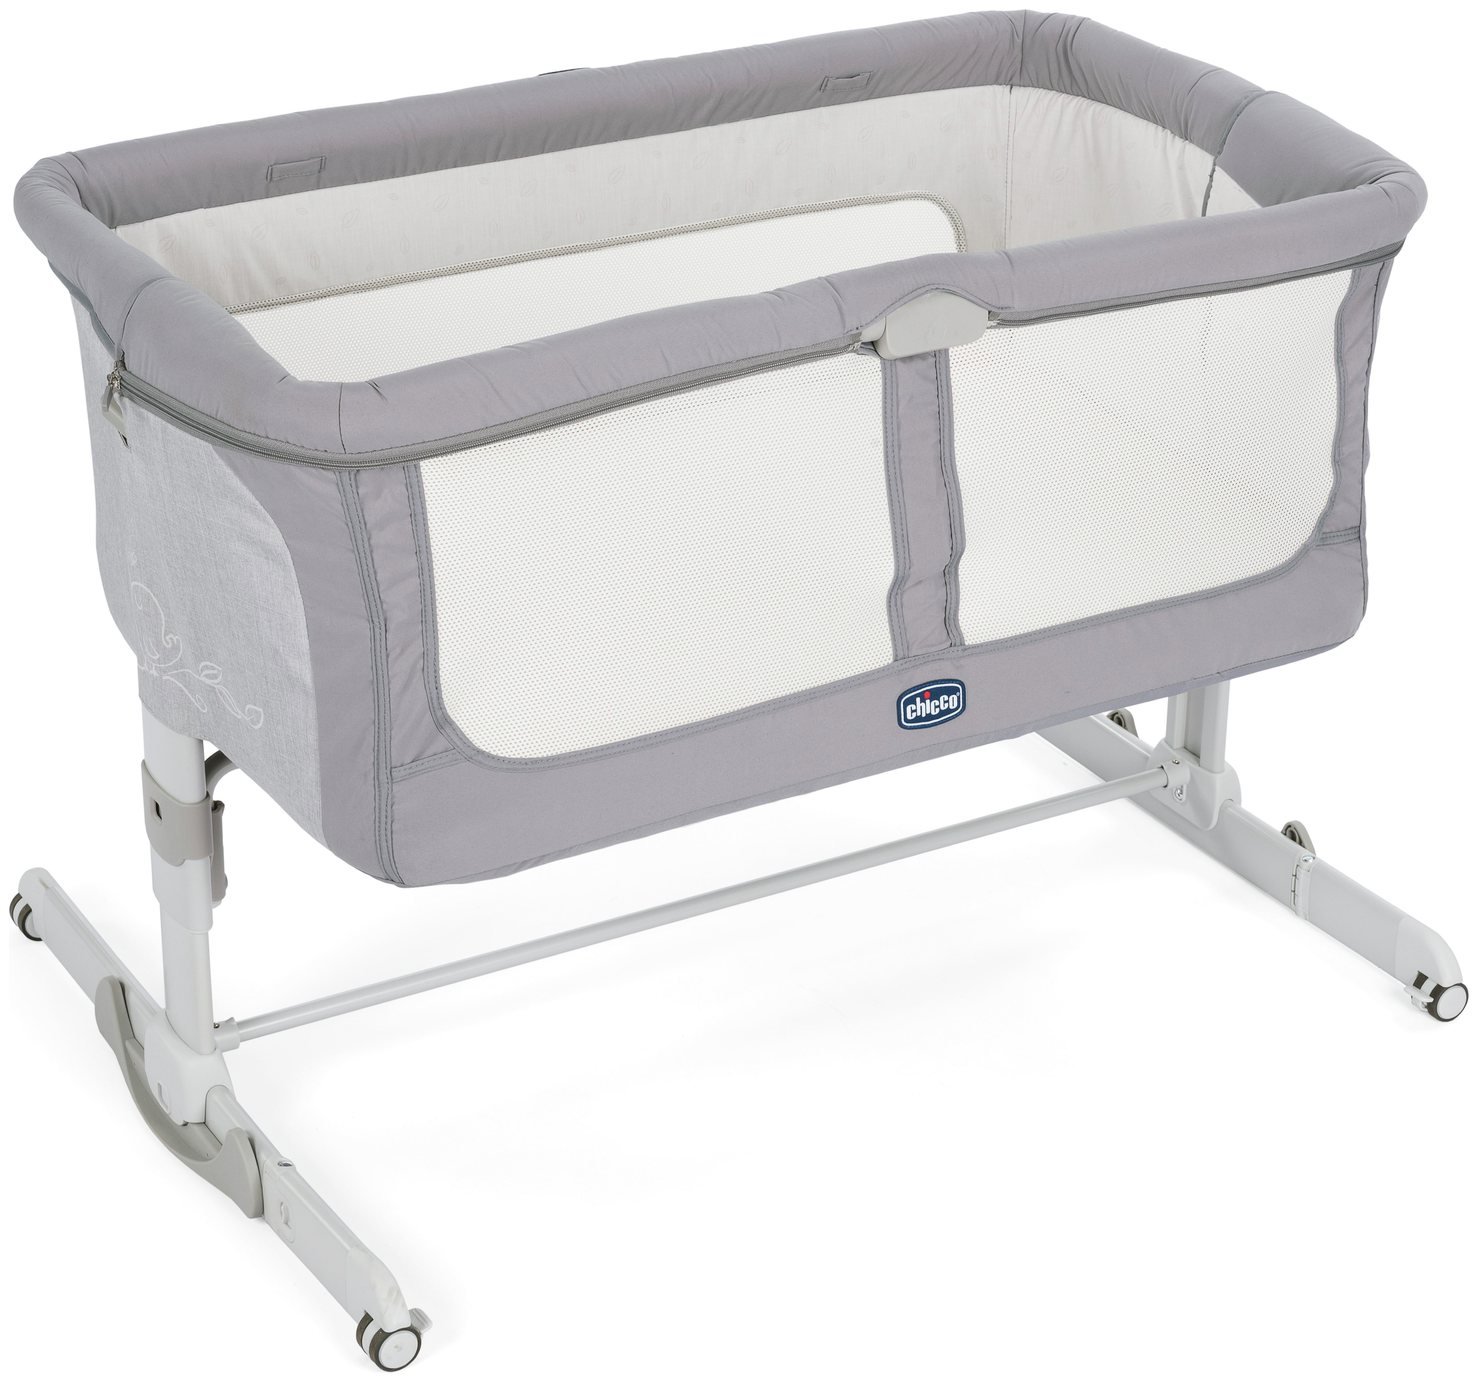 does a crib mattress fit in a pack and play